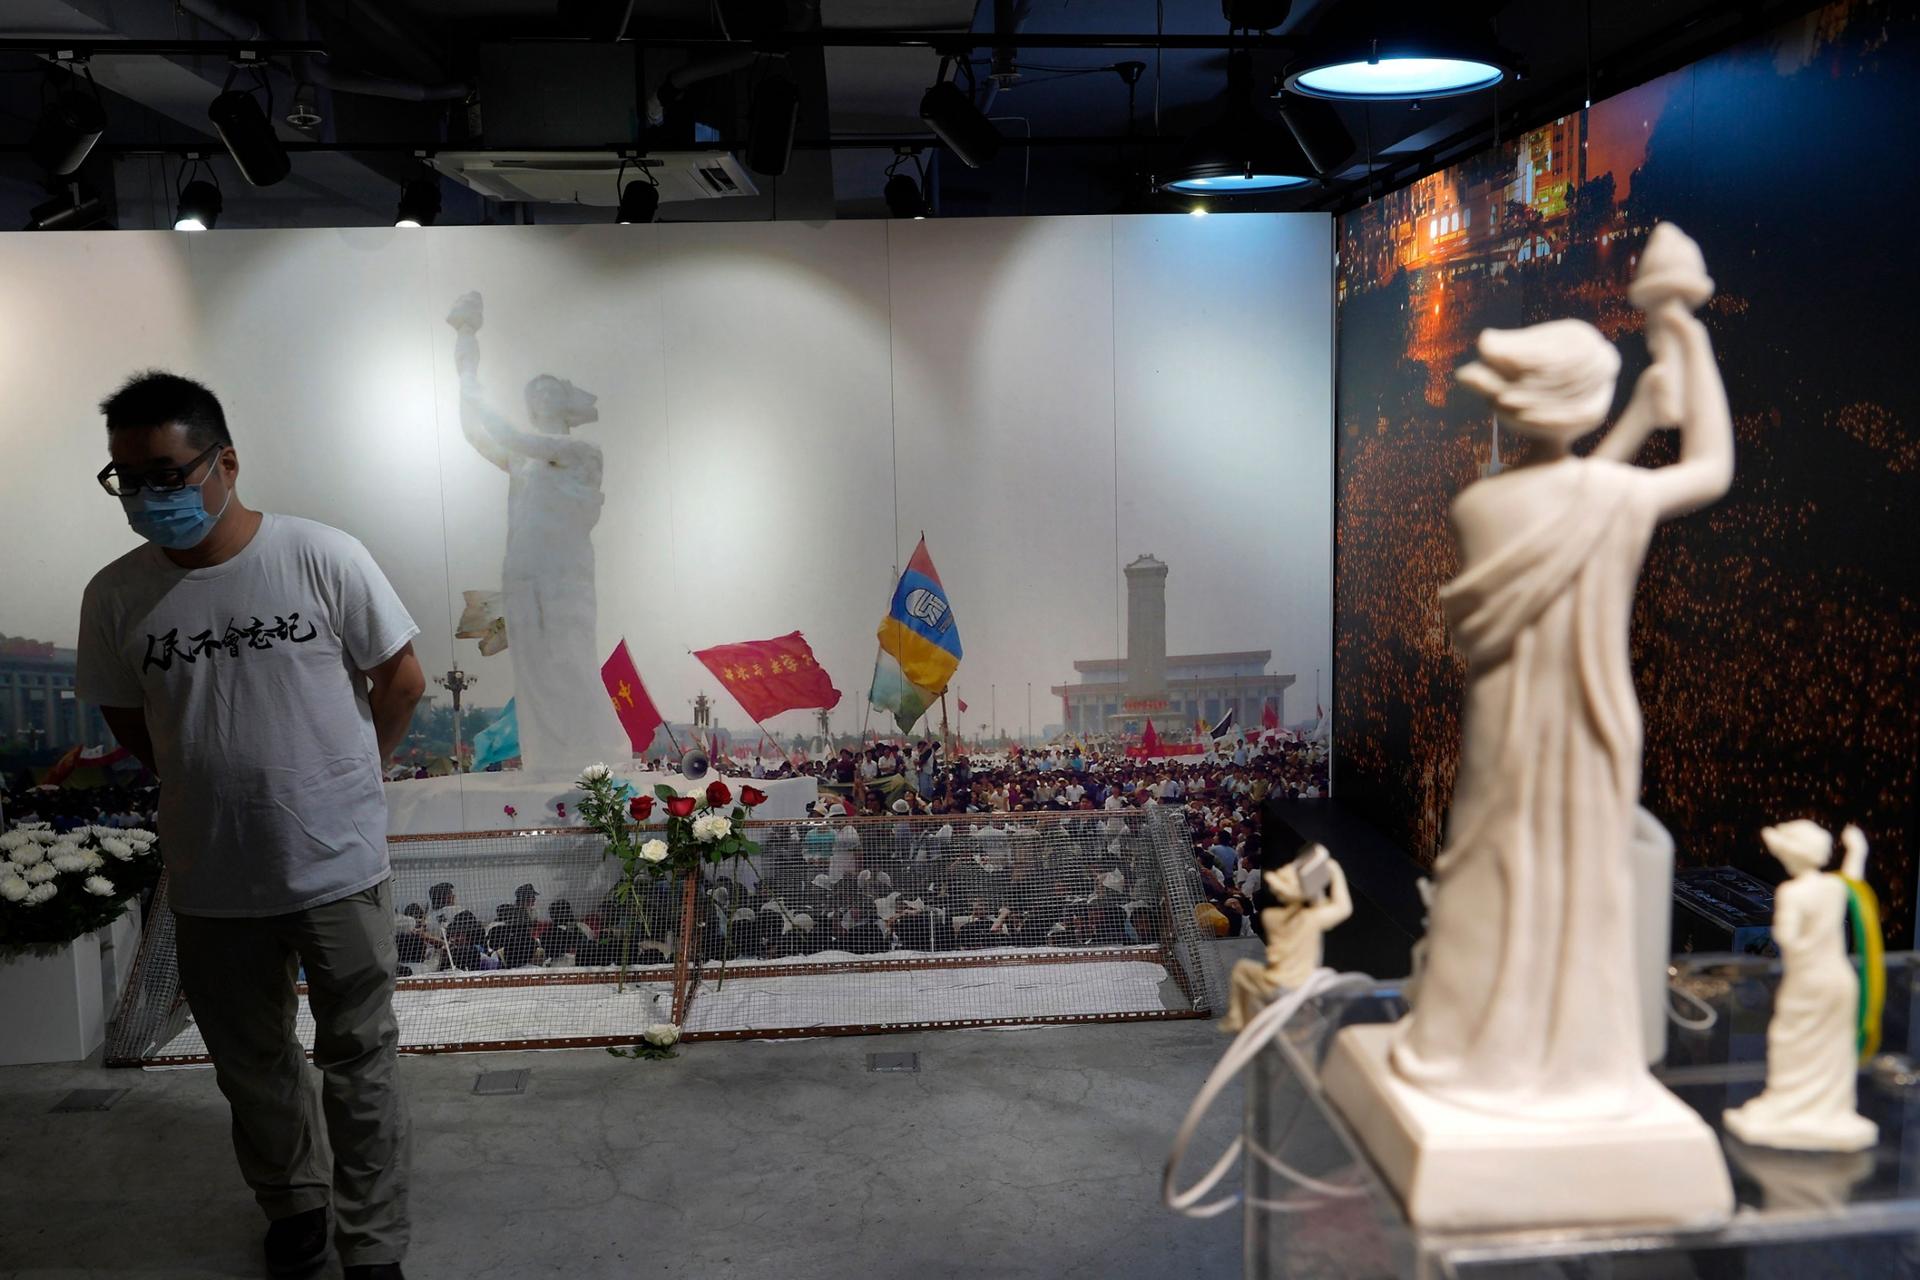 A man is shown wearing a white t-shirt, face mask and glasses while standing in front of a large wall-sized photograph depicting the Goddess of Democracy statue.